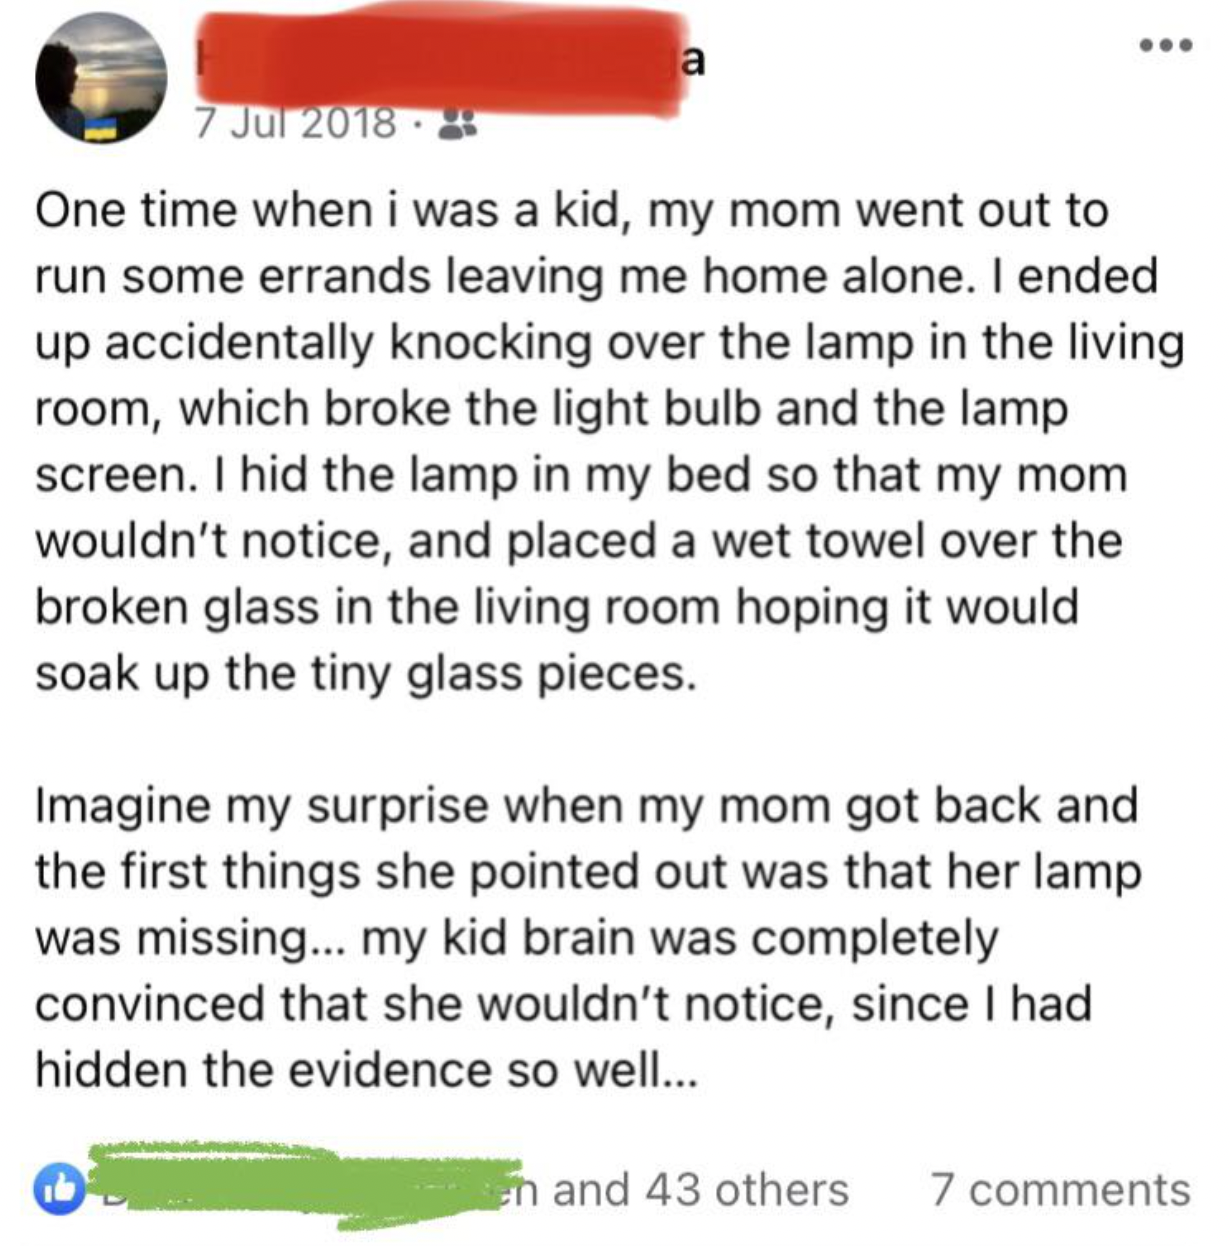 Kids are Dumb - document - ... One time when i was a kid, my mom went out to run some errands leaving me home alone. I ended up accidentally knocking over the lamp in the living room, which broke the light bulb and the lamp screen. I hid the lamp in my be